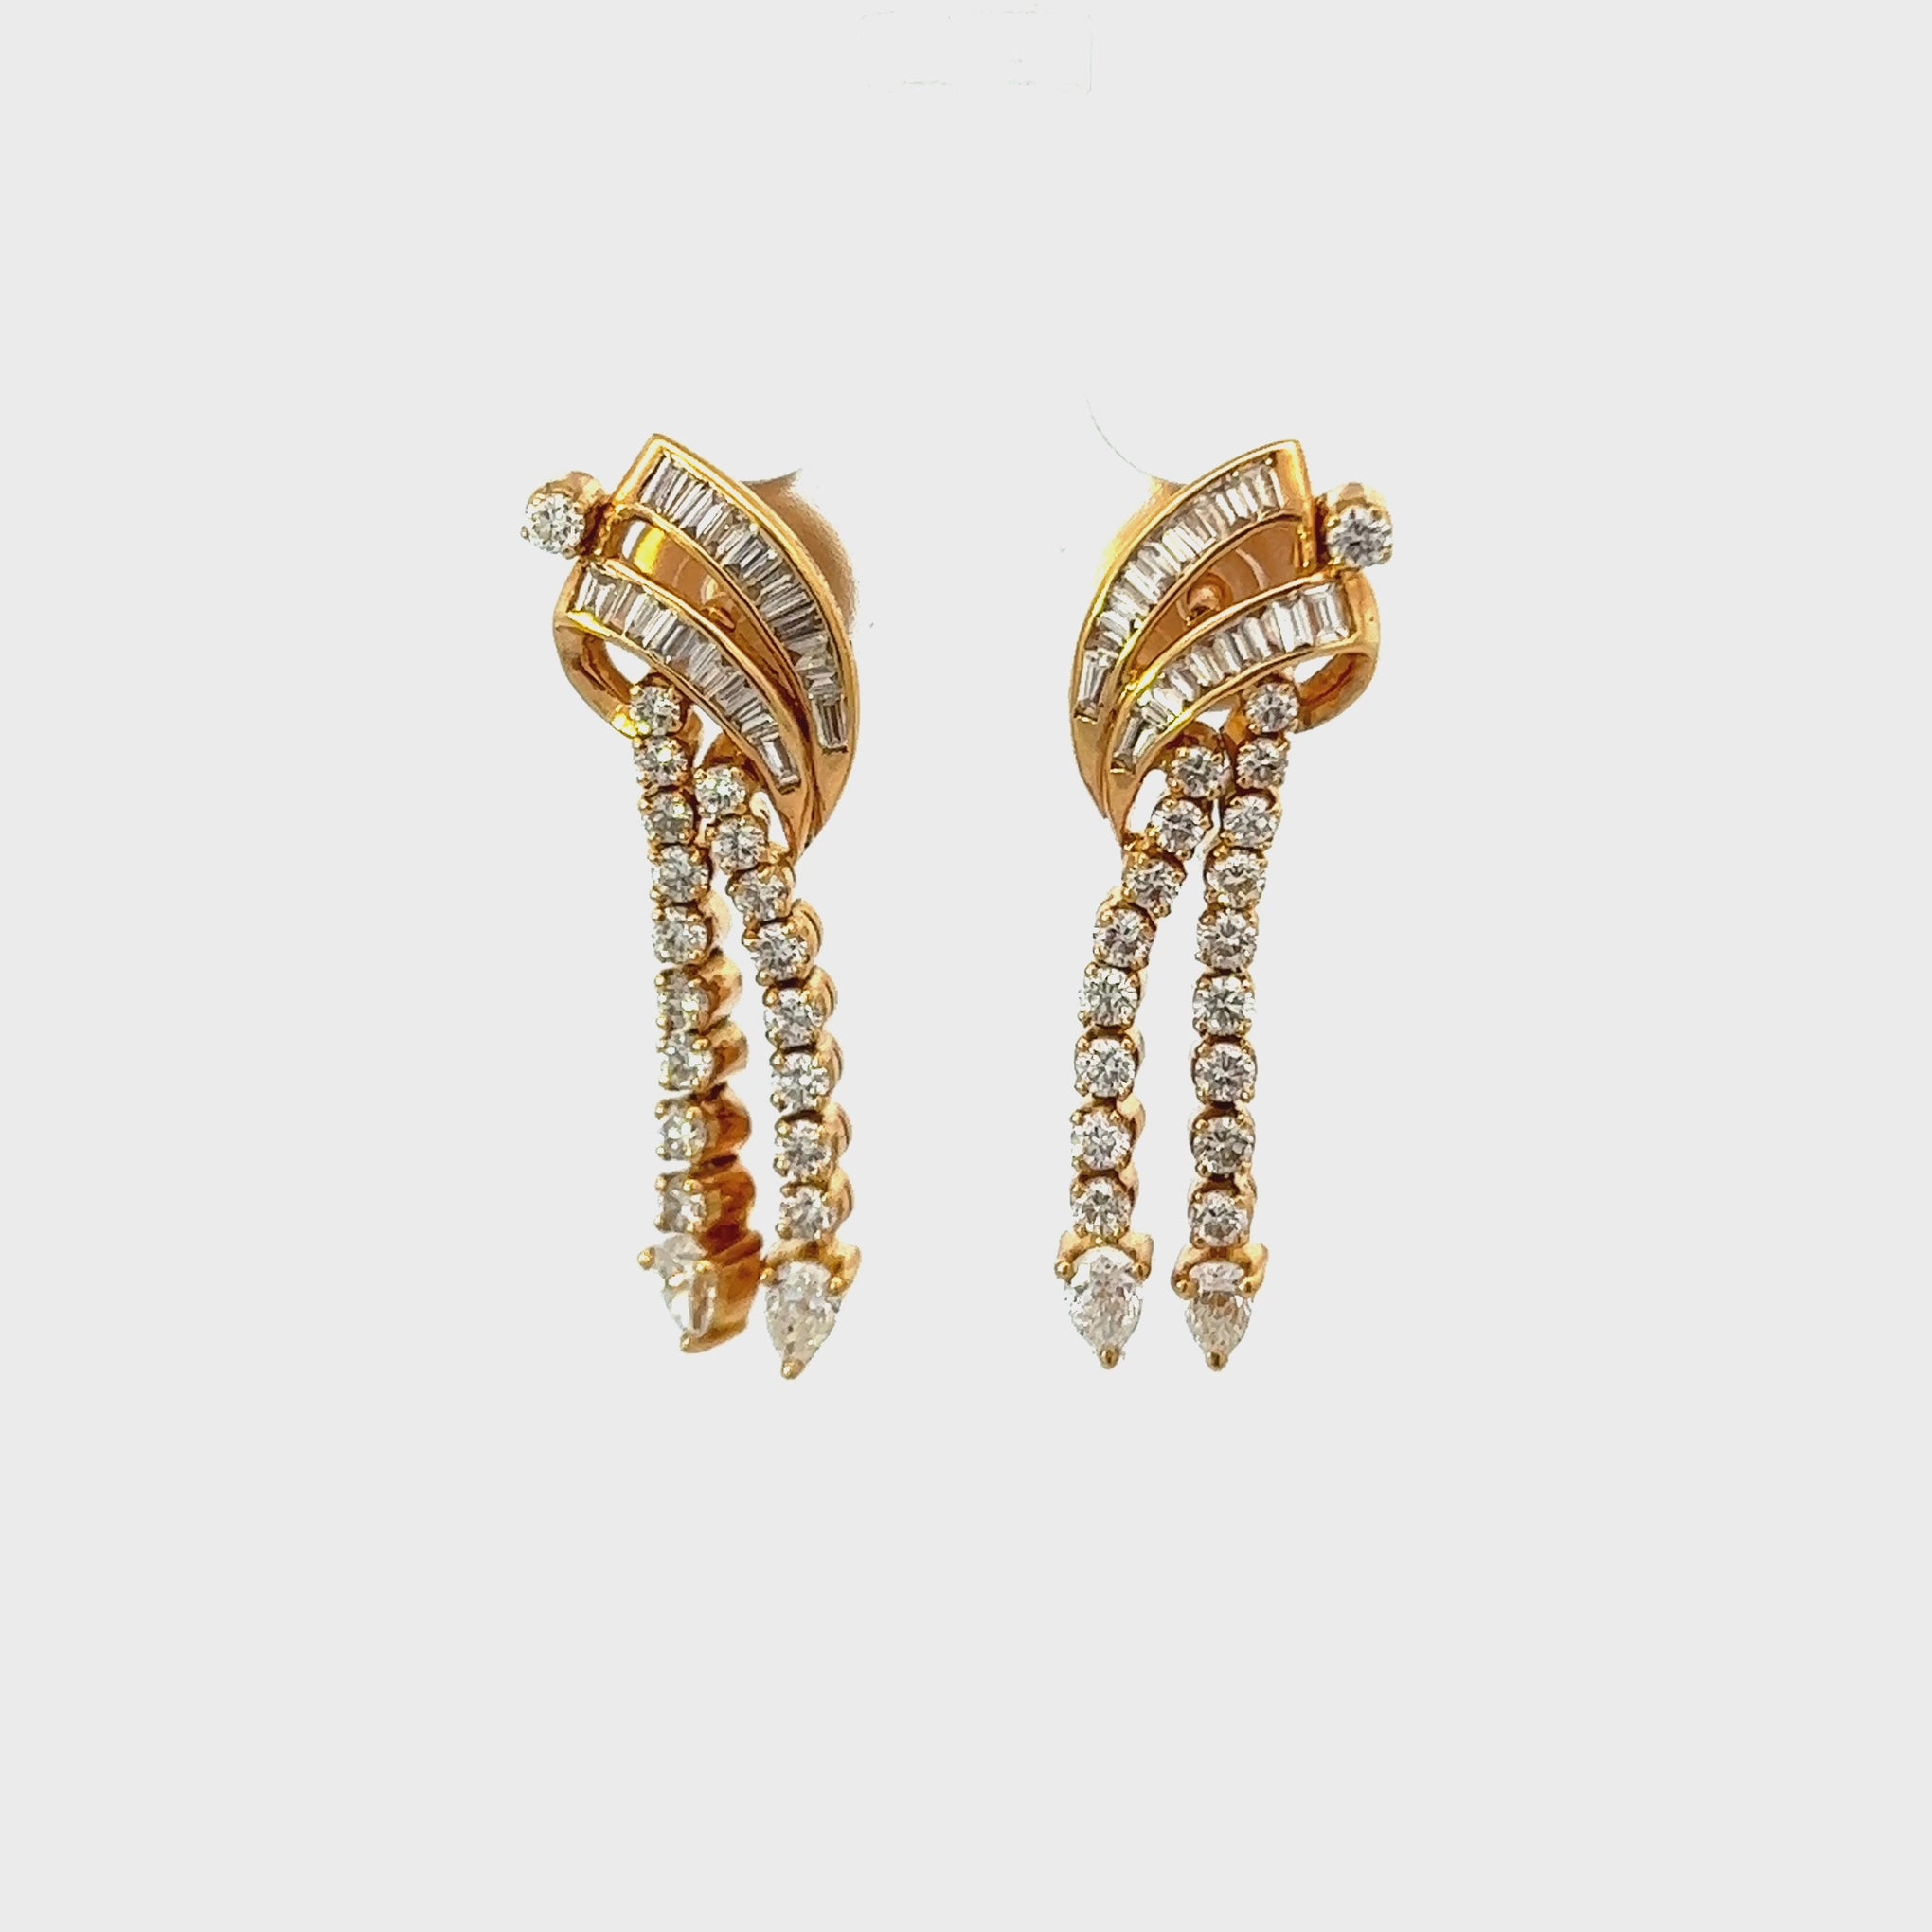 18KT Yellow Gold Baguette And Pear Shaped Diamond Earrings